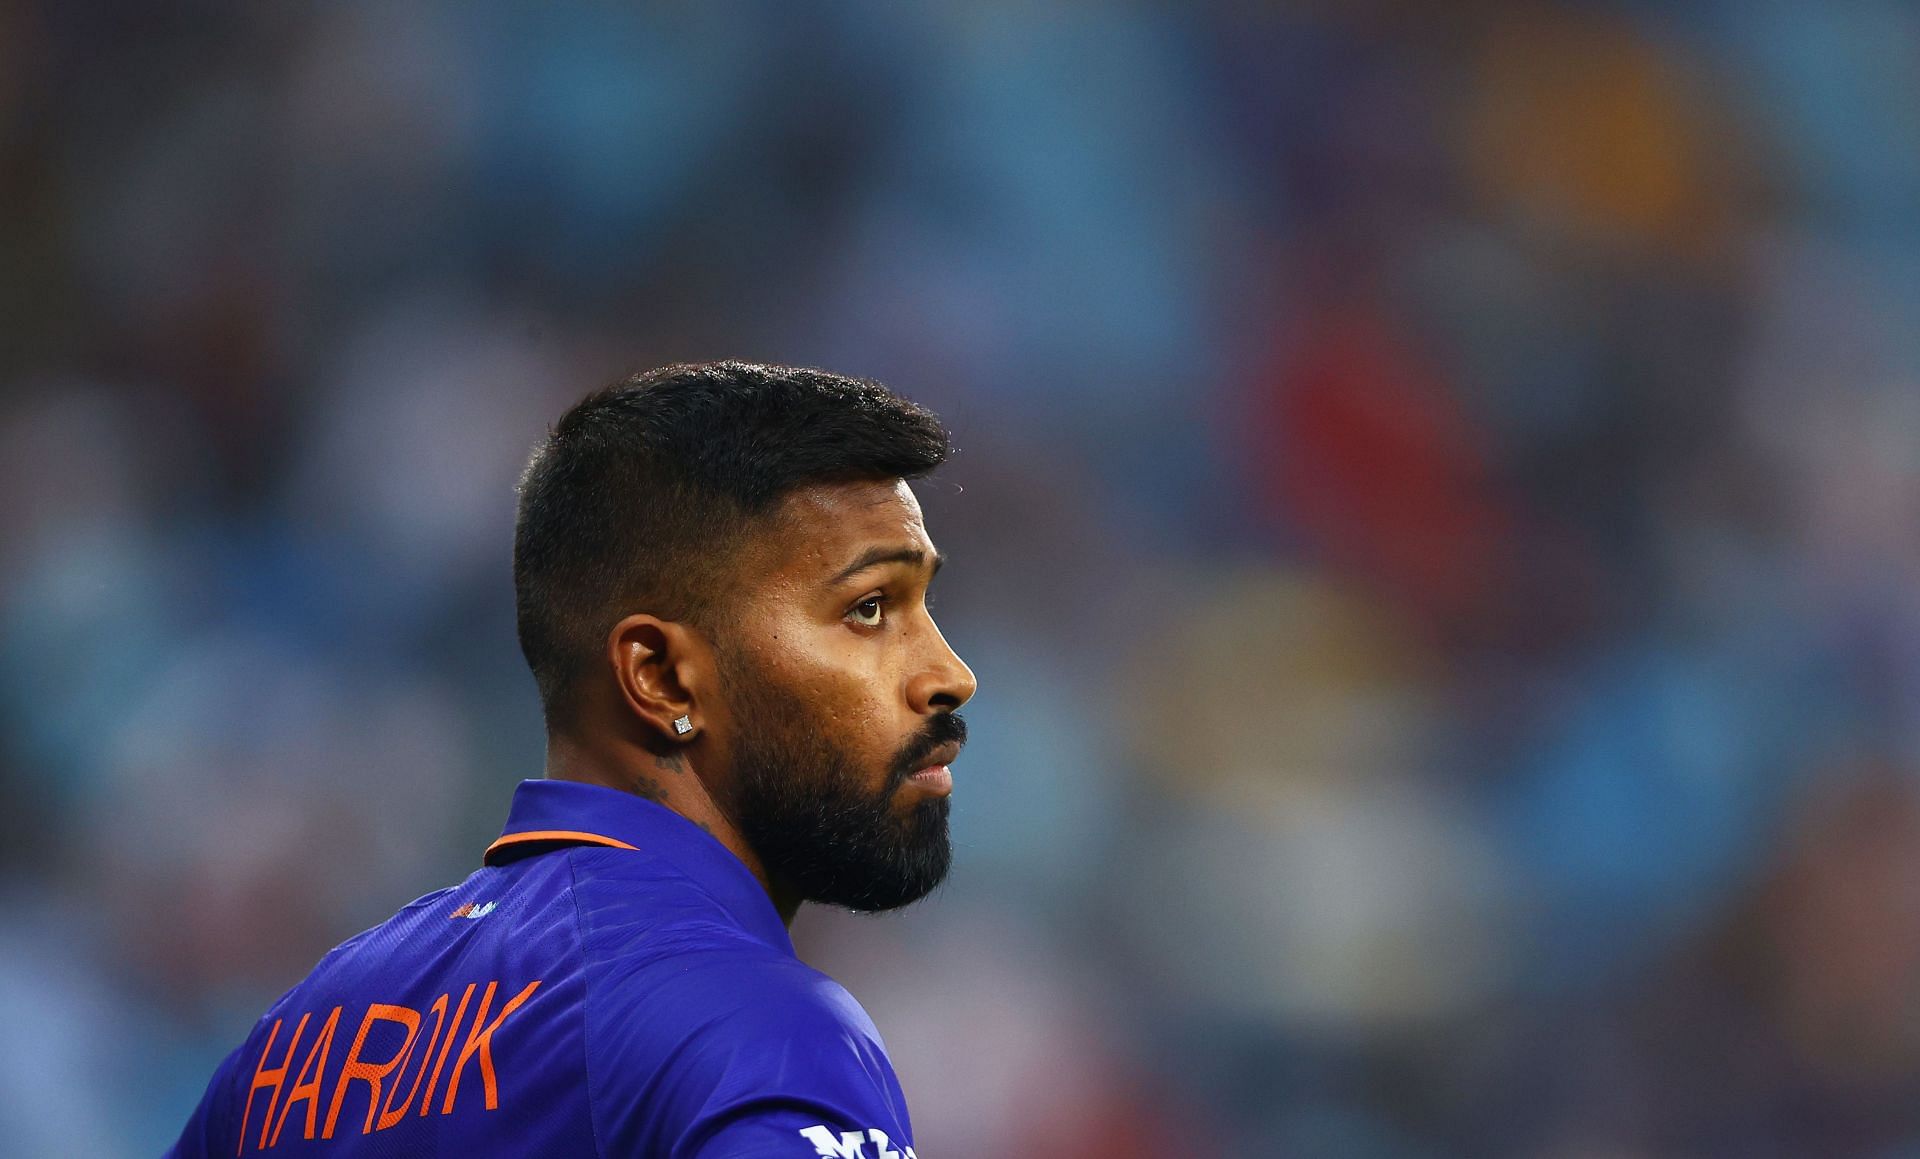 Hardik Pandya has not played for India since the T20 World Cup